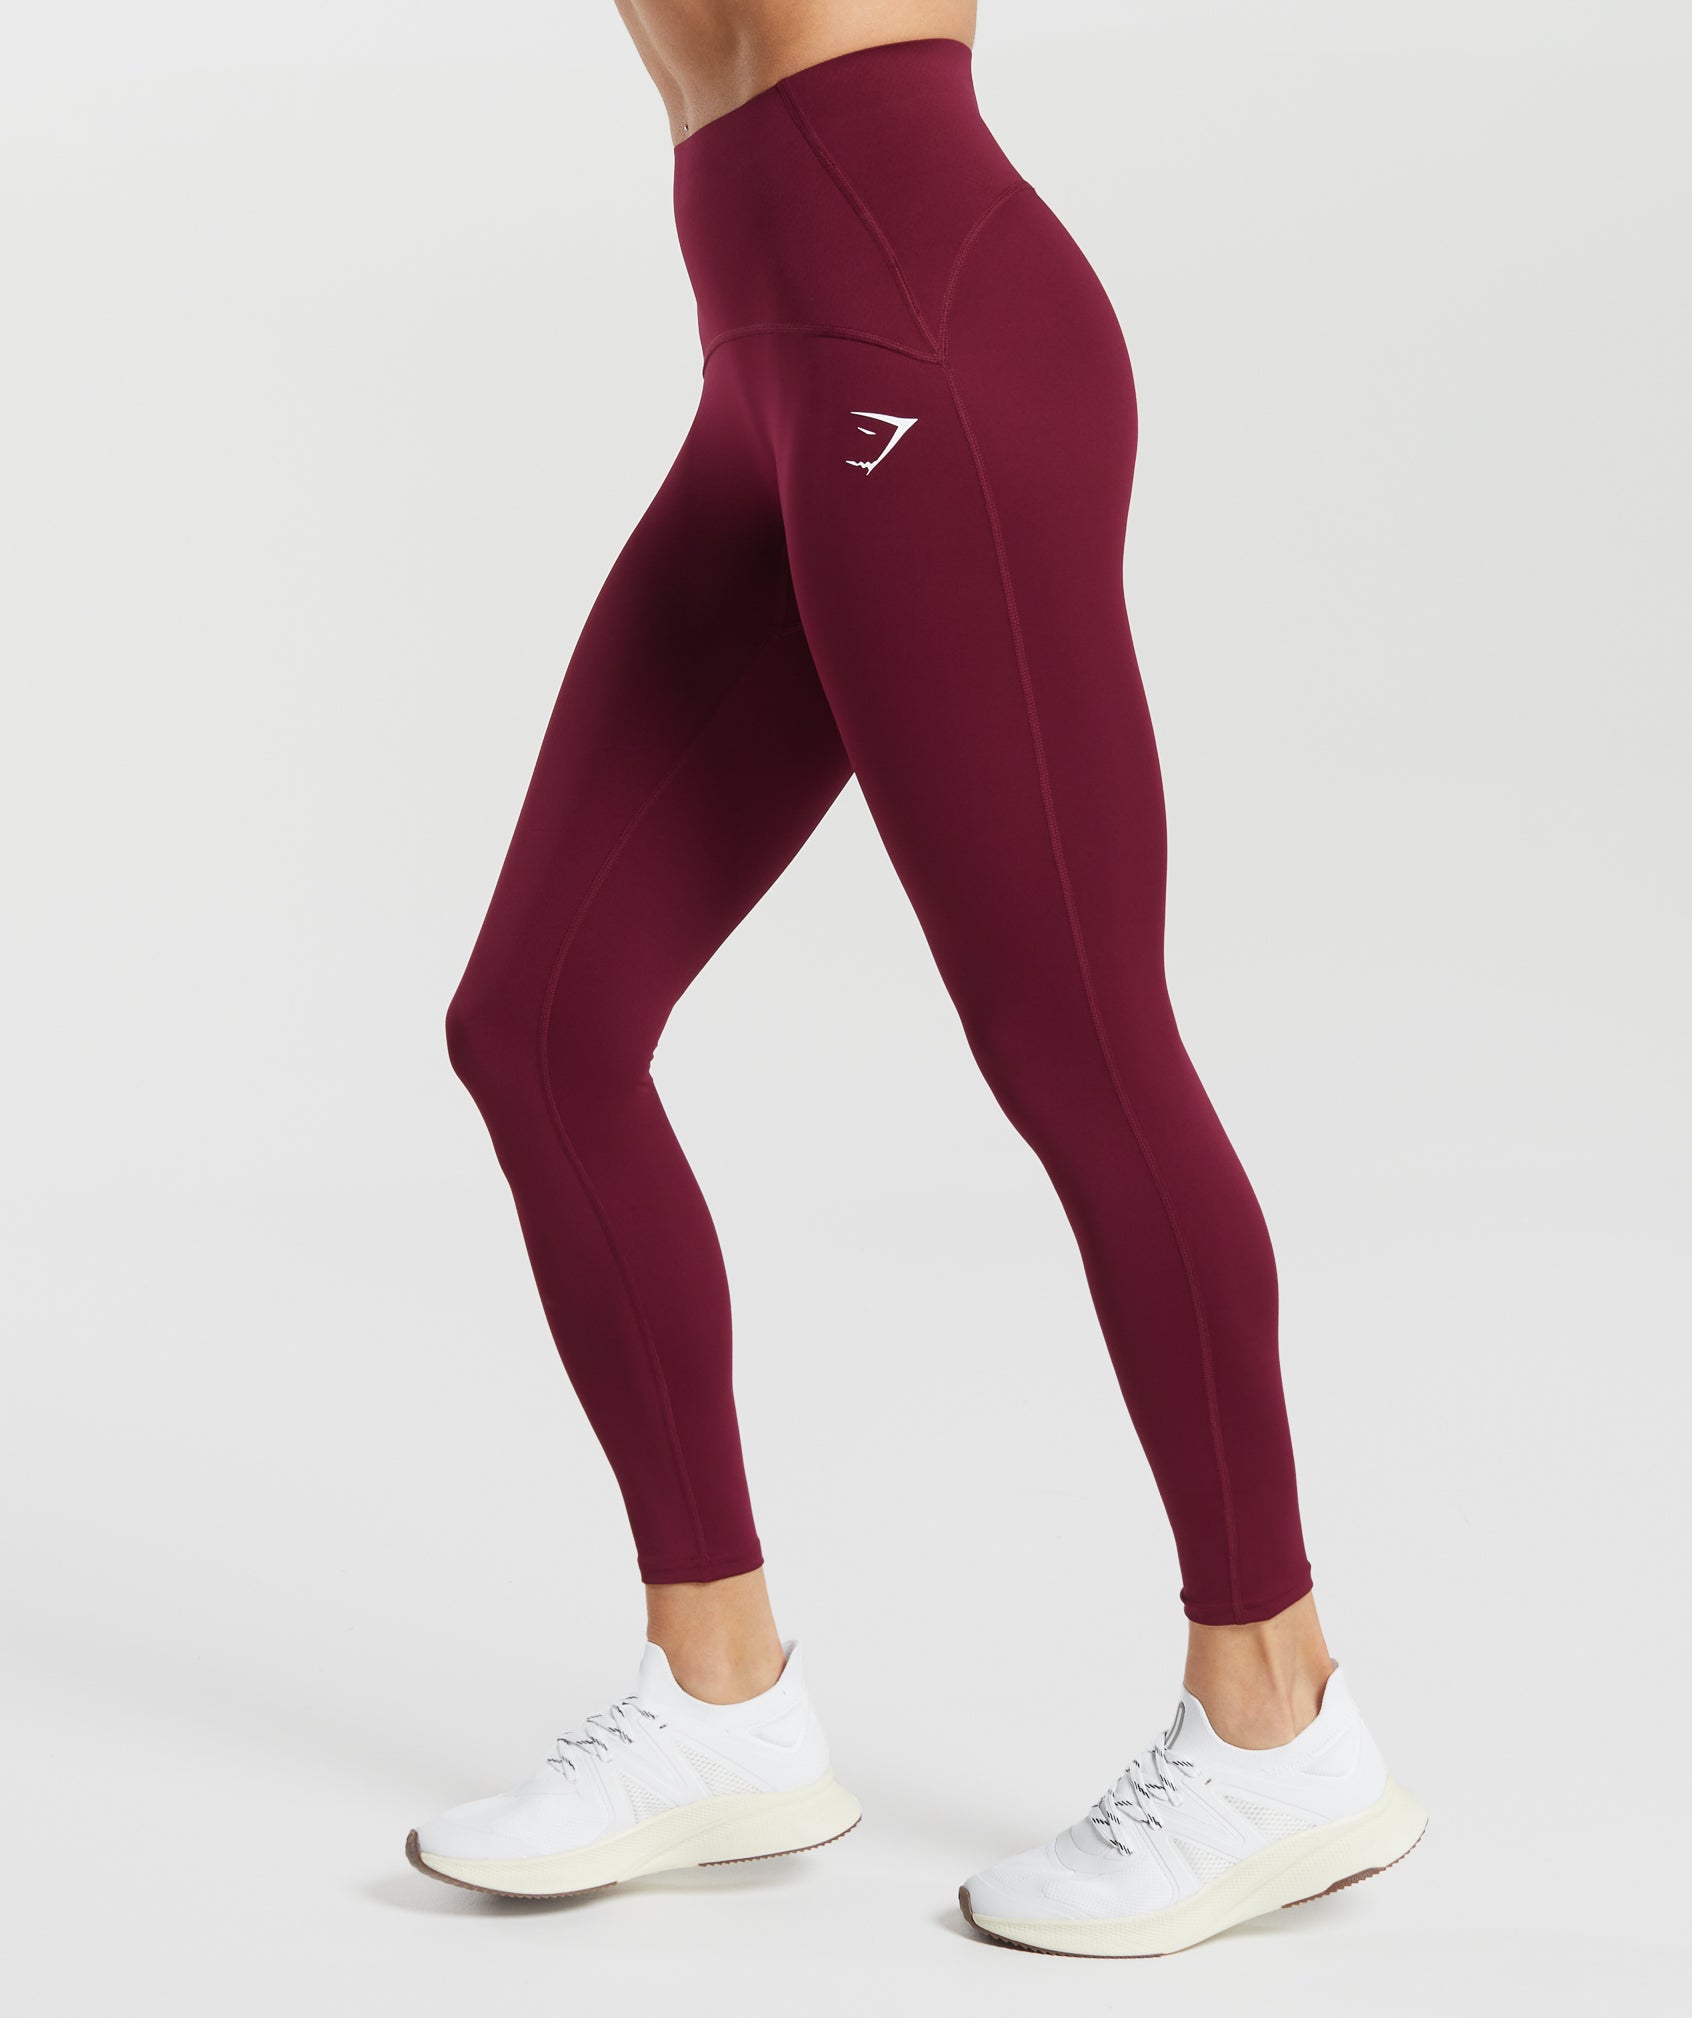 Waist Support Leggings in Plum Pink - view 5